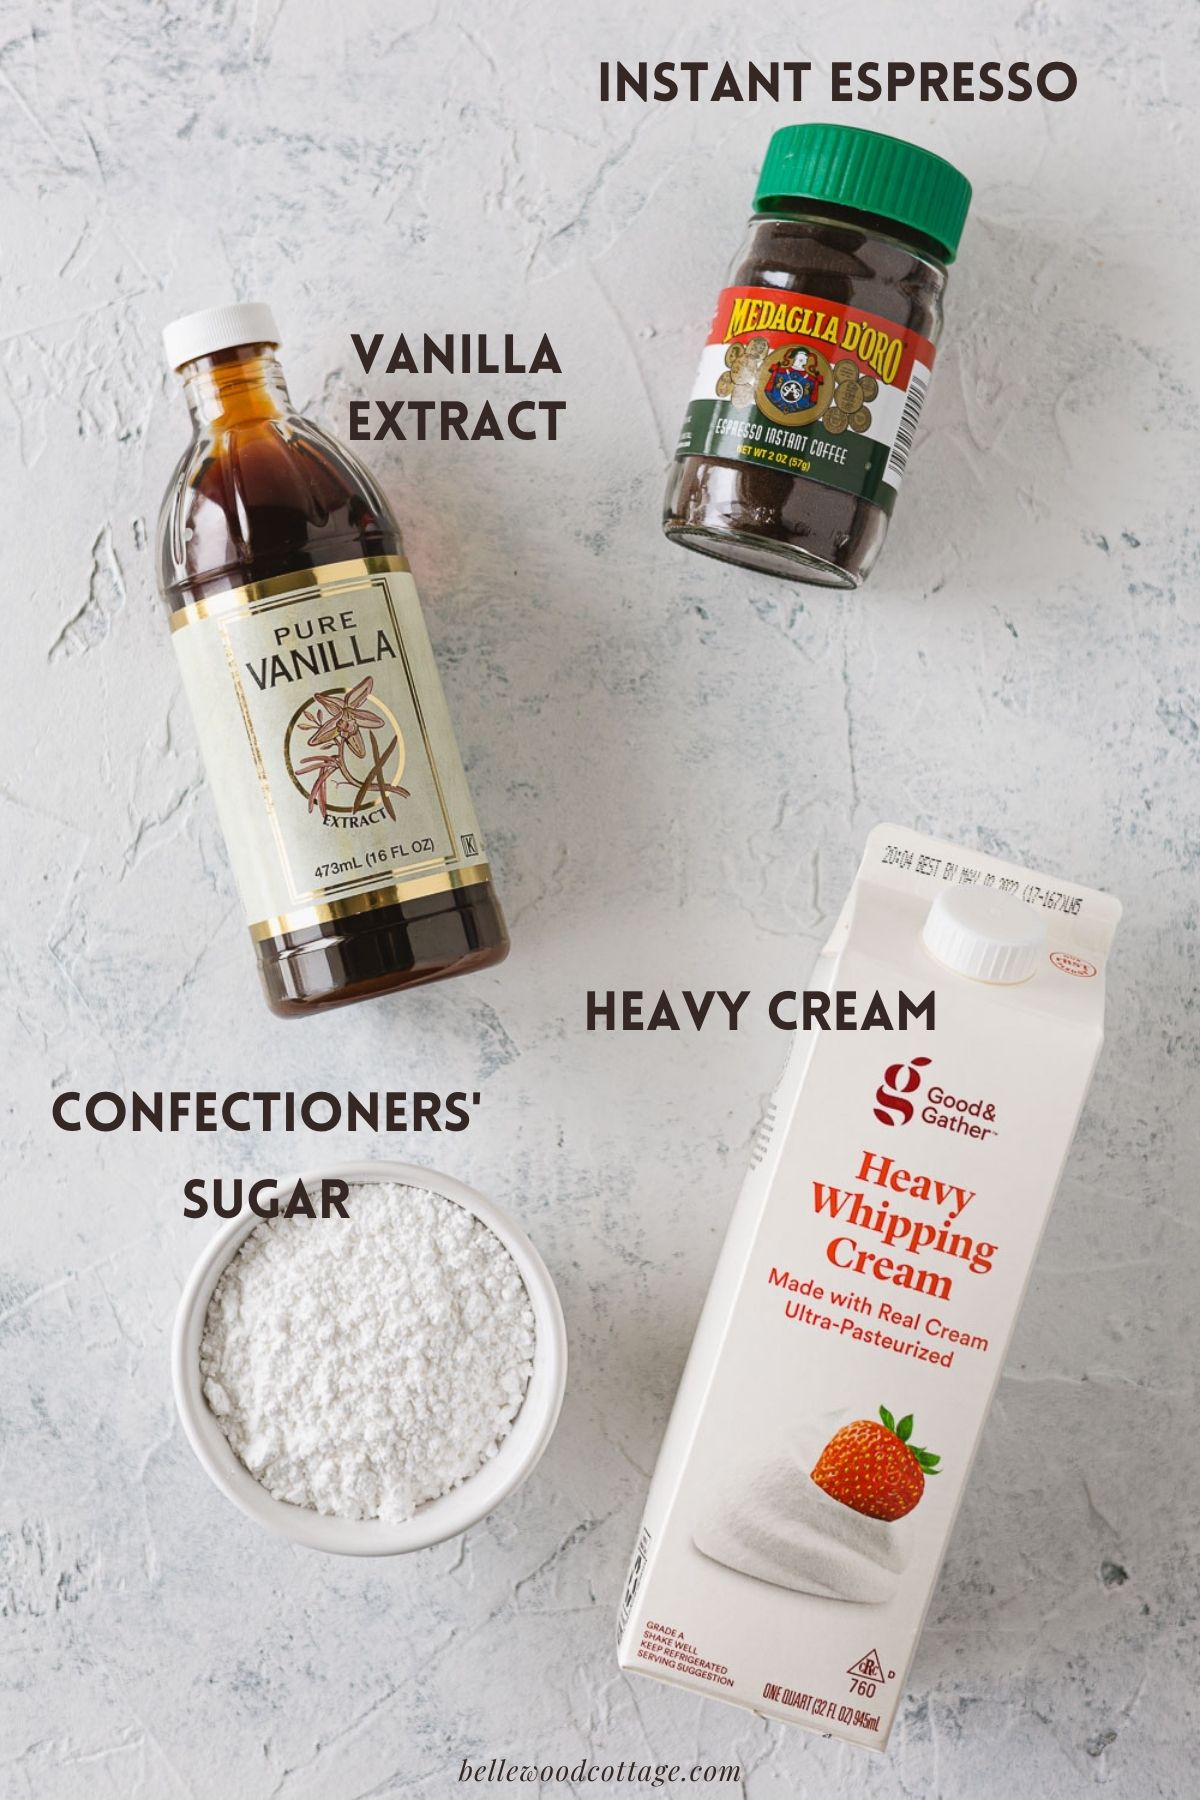 Four ingredients with text labels: instant espresso powder, vanilla extract, confectioners' sugar, and heavy whipping cream.